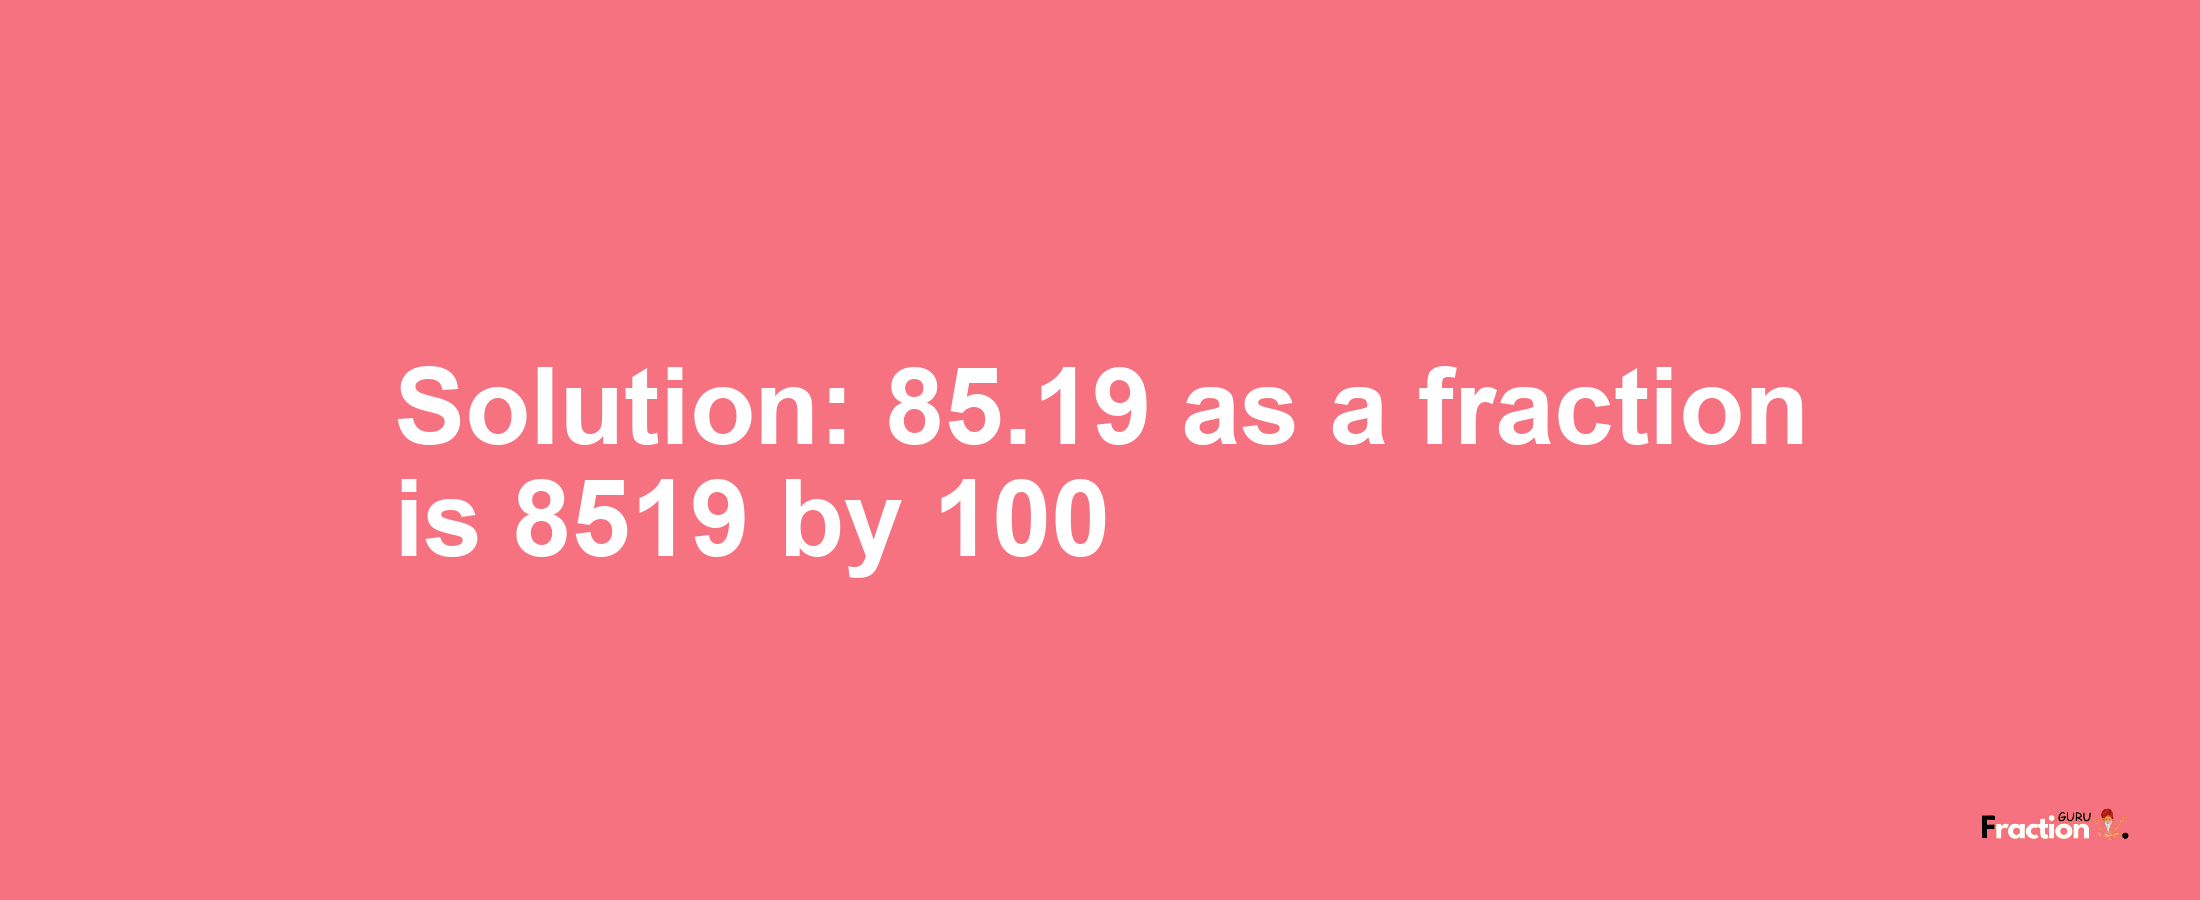 Solution:85.19 as a fraction is 8519/100